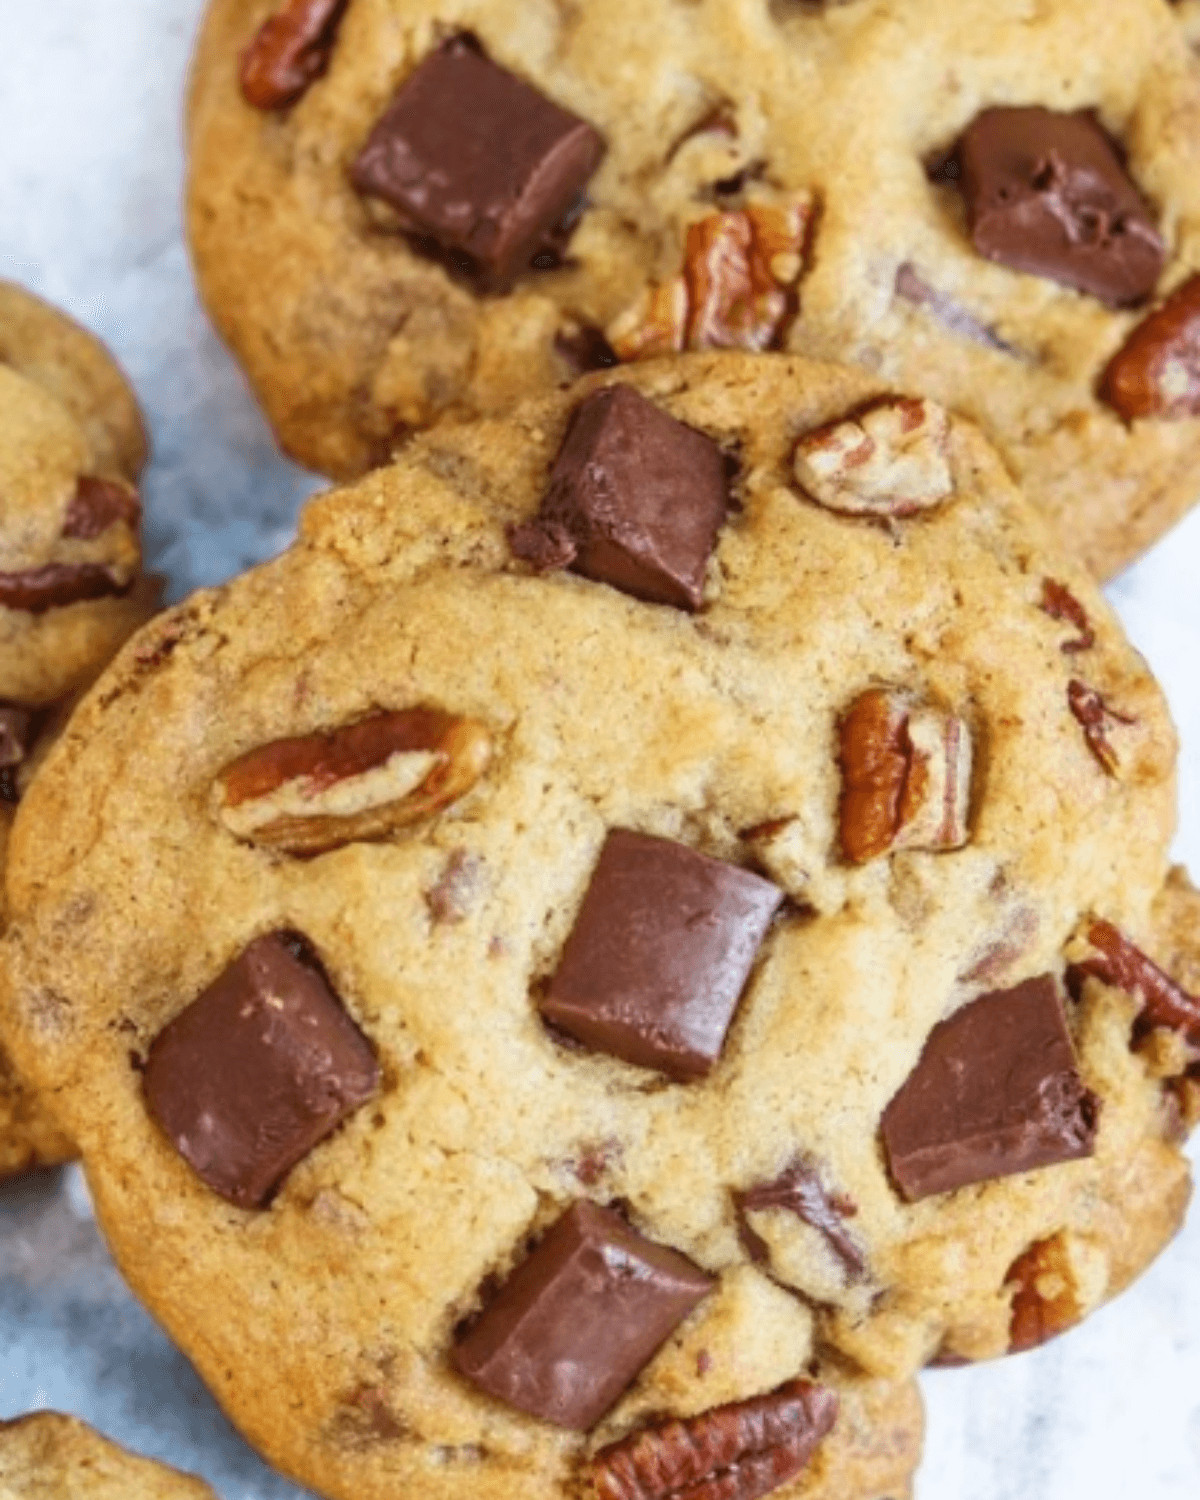 A close up on the snickers cookies.